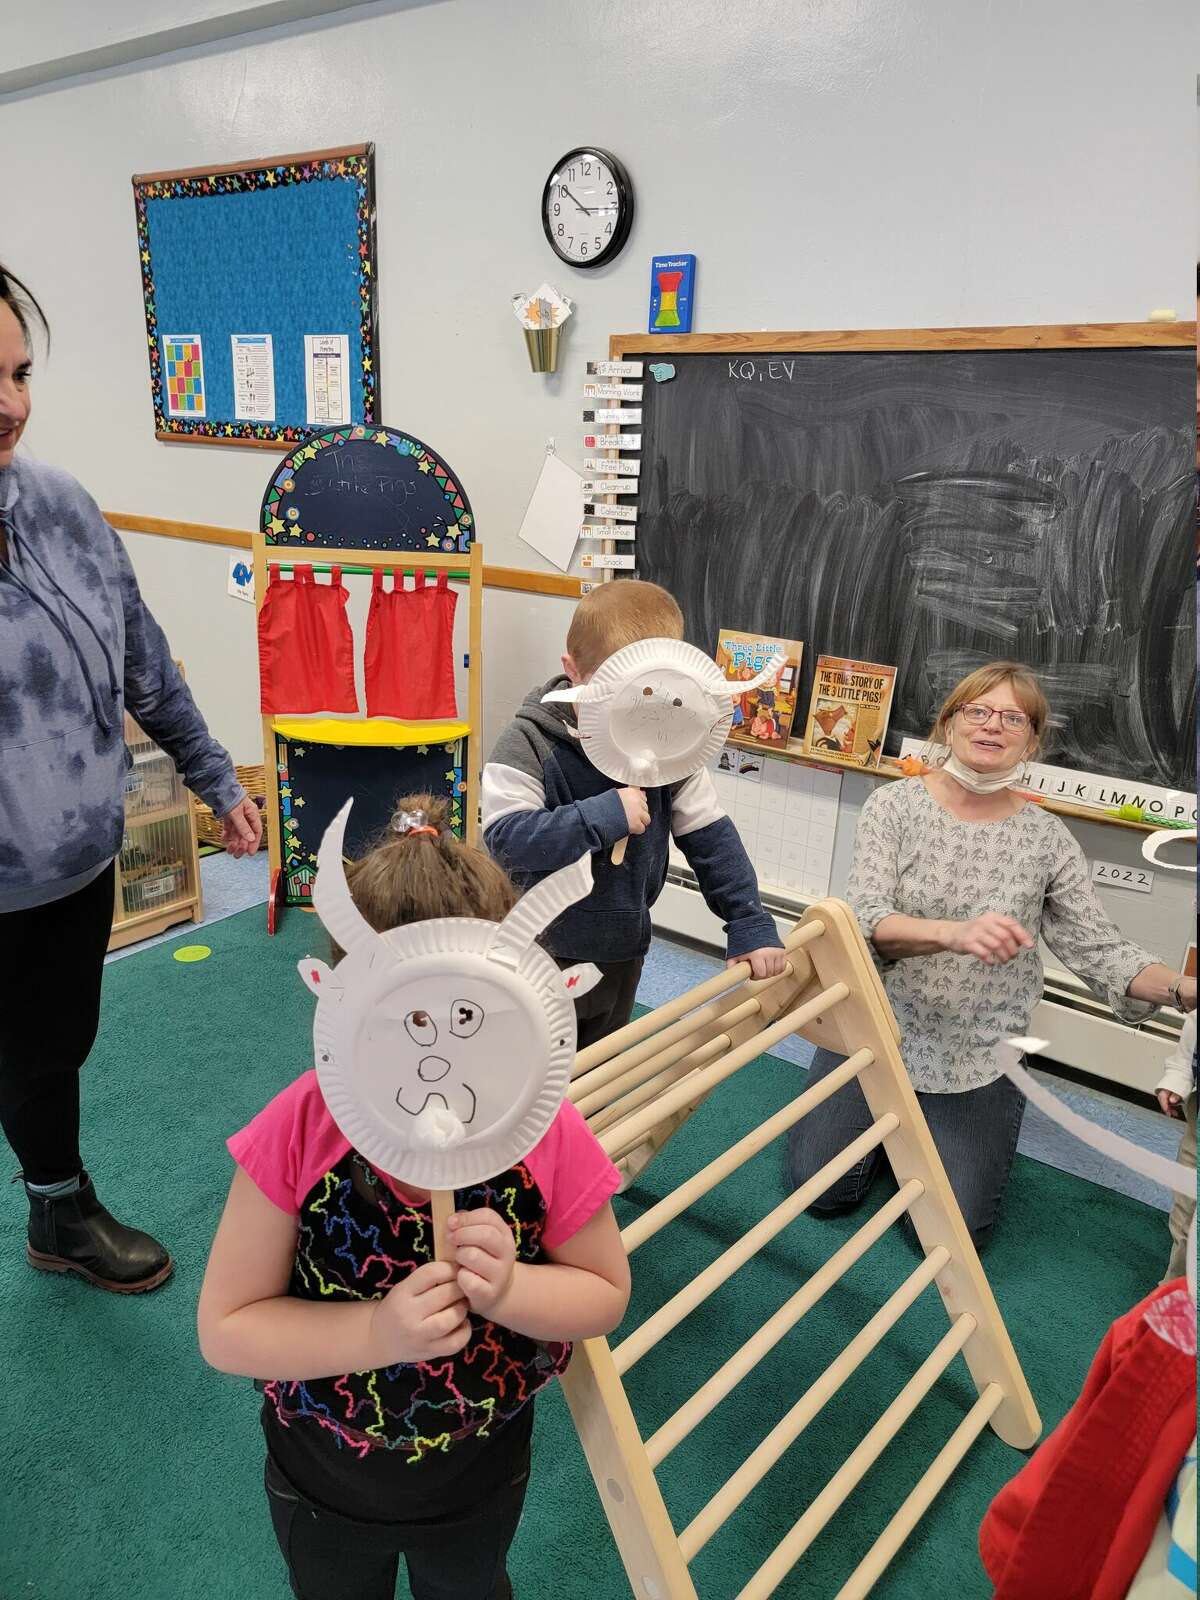 Students perform at the special education integrated preschool Children's Development Group of Keeseville. The school is closing June 30 after years of being underfunded by the state.